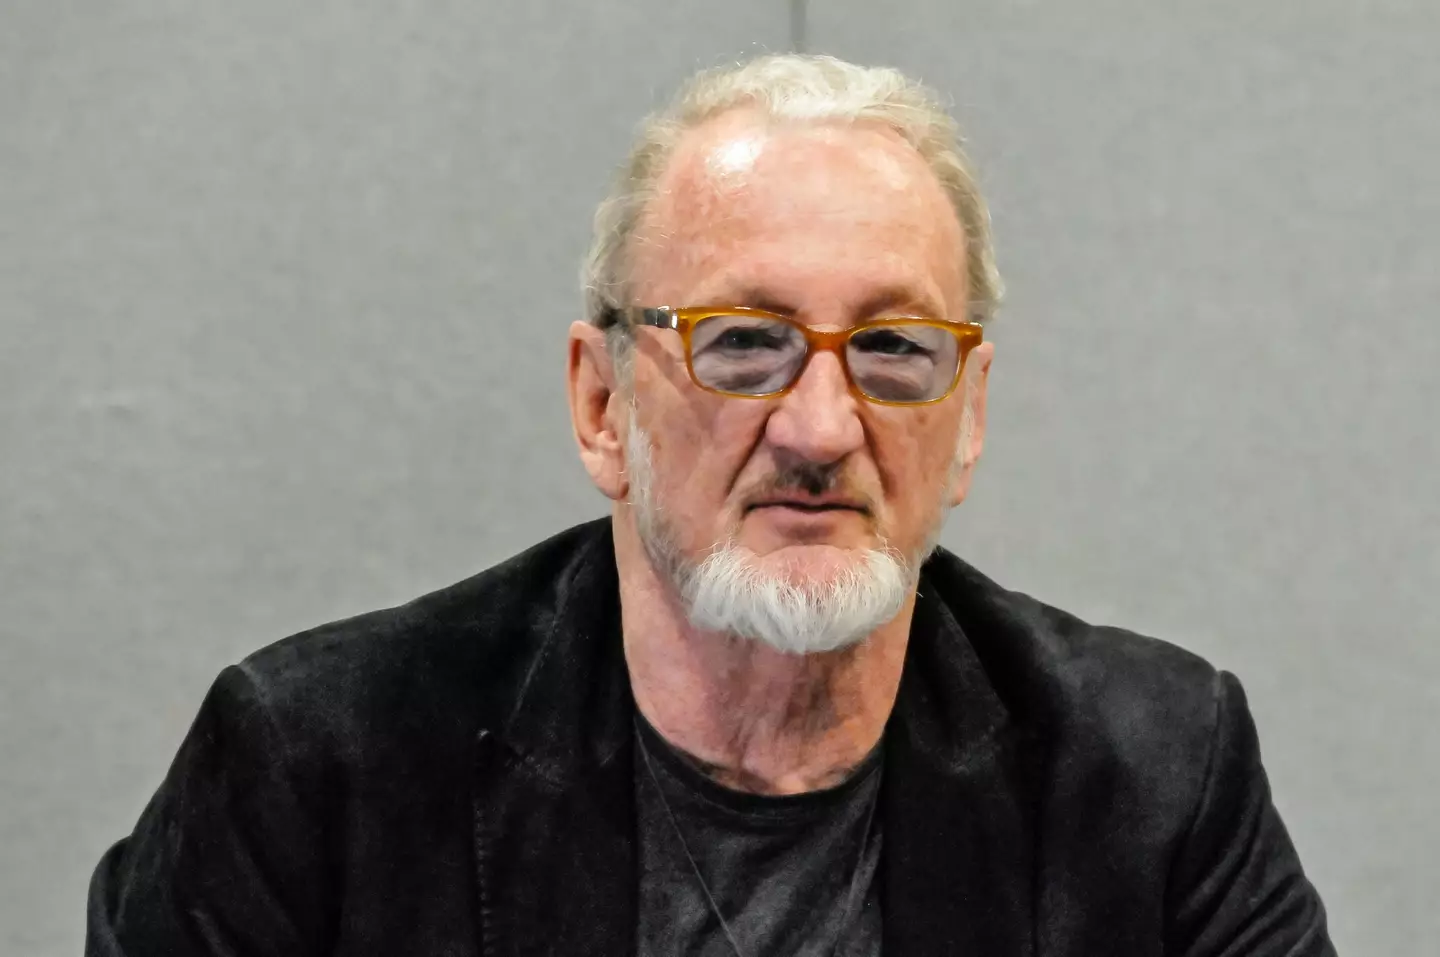 Robert Englund has said that he's finished playing Freddy Krueger.